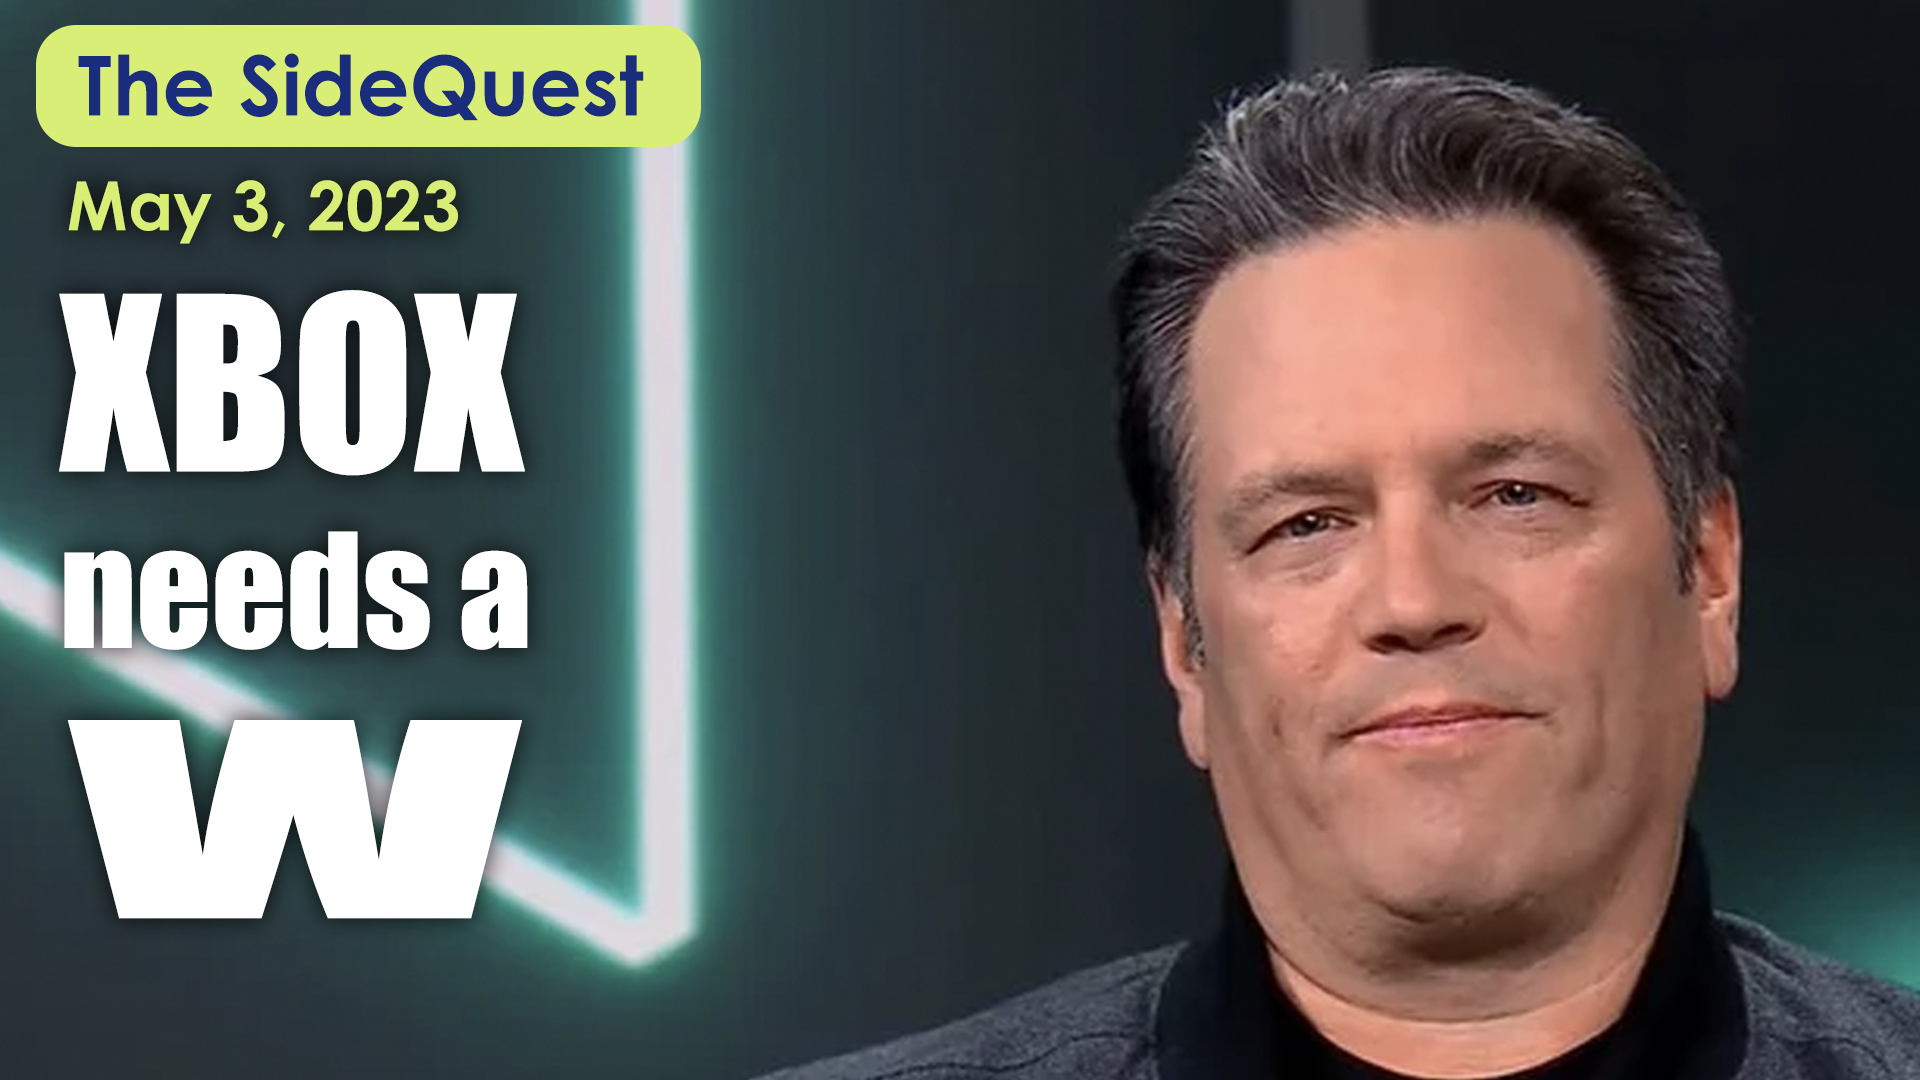 The SideQuest LIVE! May 3, 2023: XBOX Needs a W